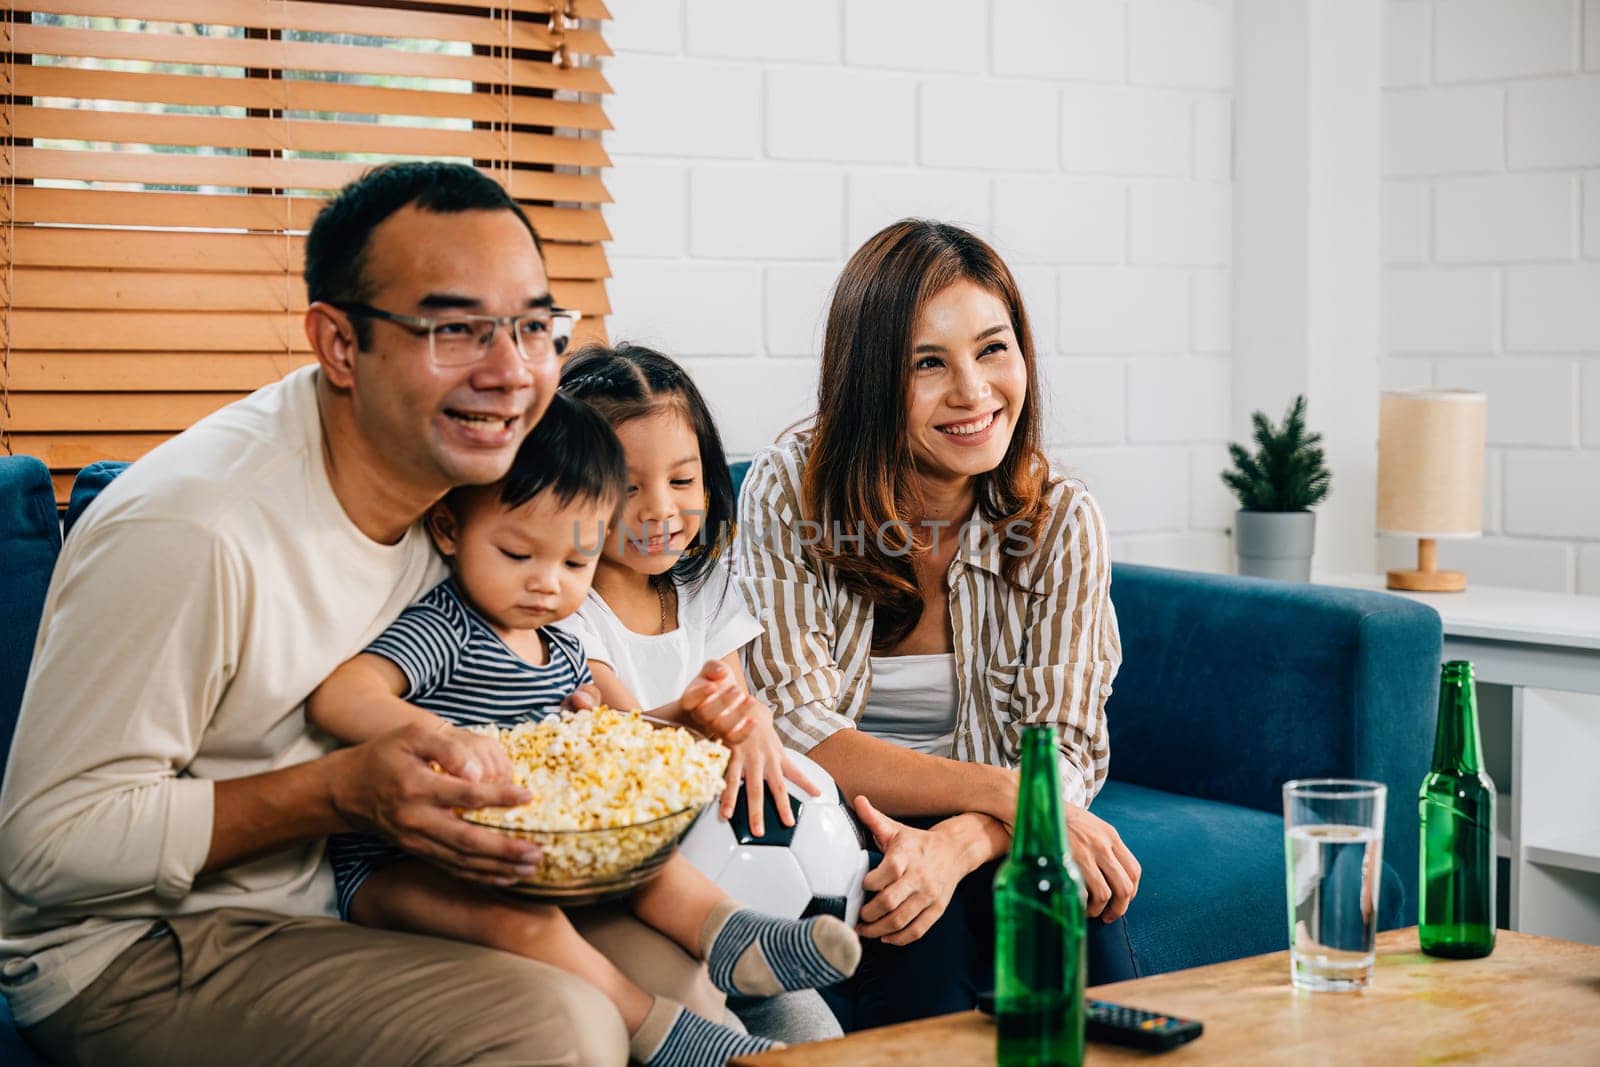 In their cozy living room, a joyful family and their daughter bond over a football match on TV. Their cheers, laughter, and togetherness reflect the joy of winning and celebrating a triumph.